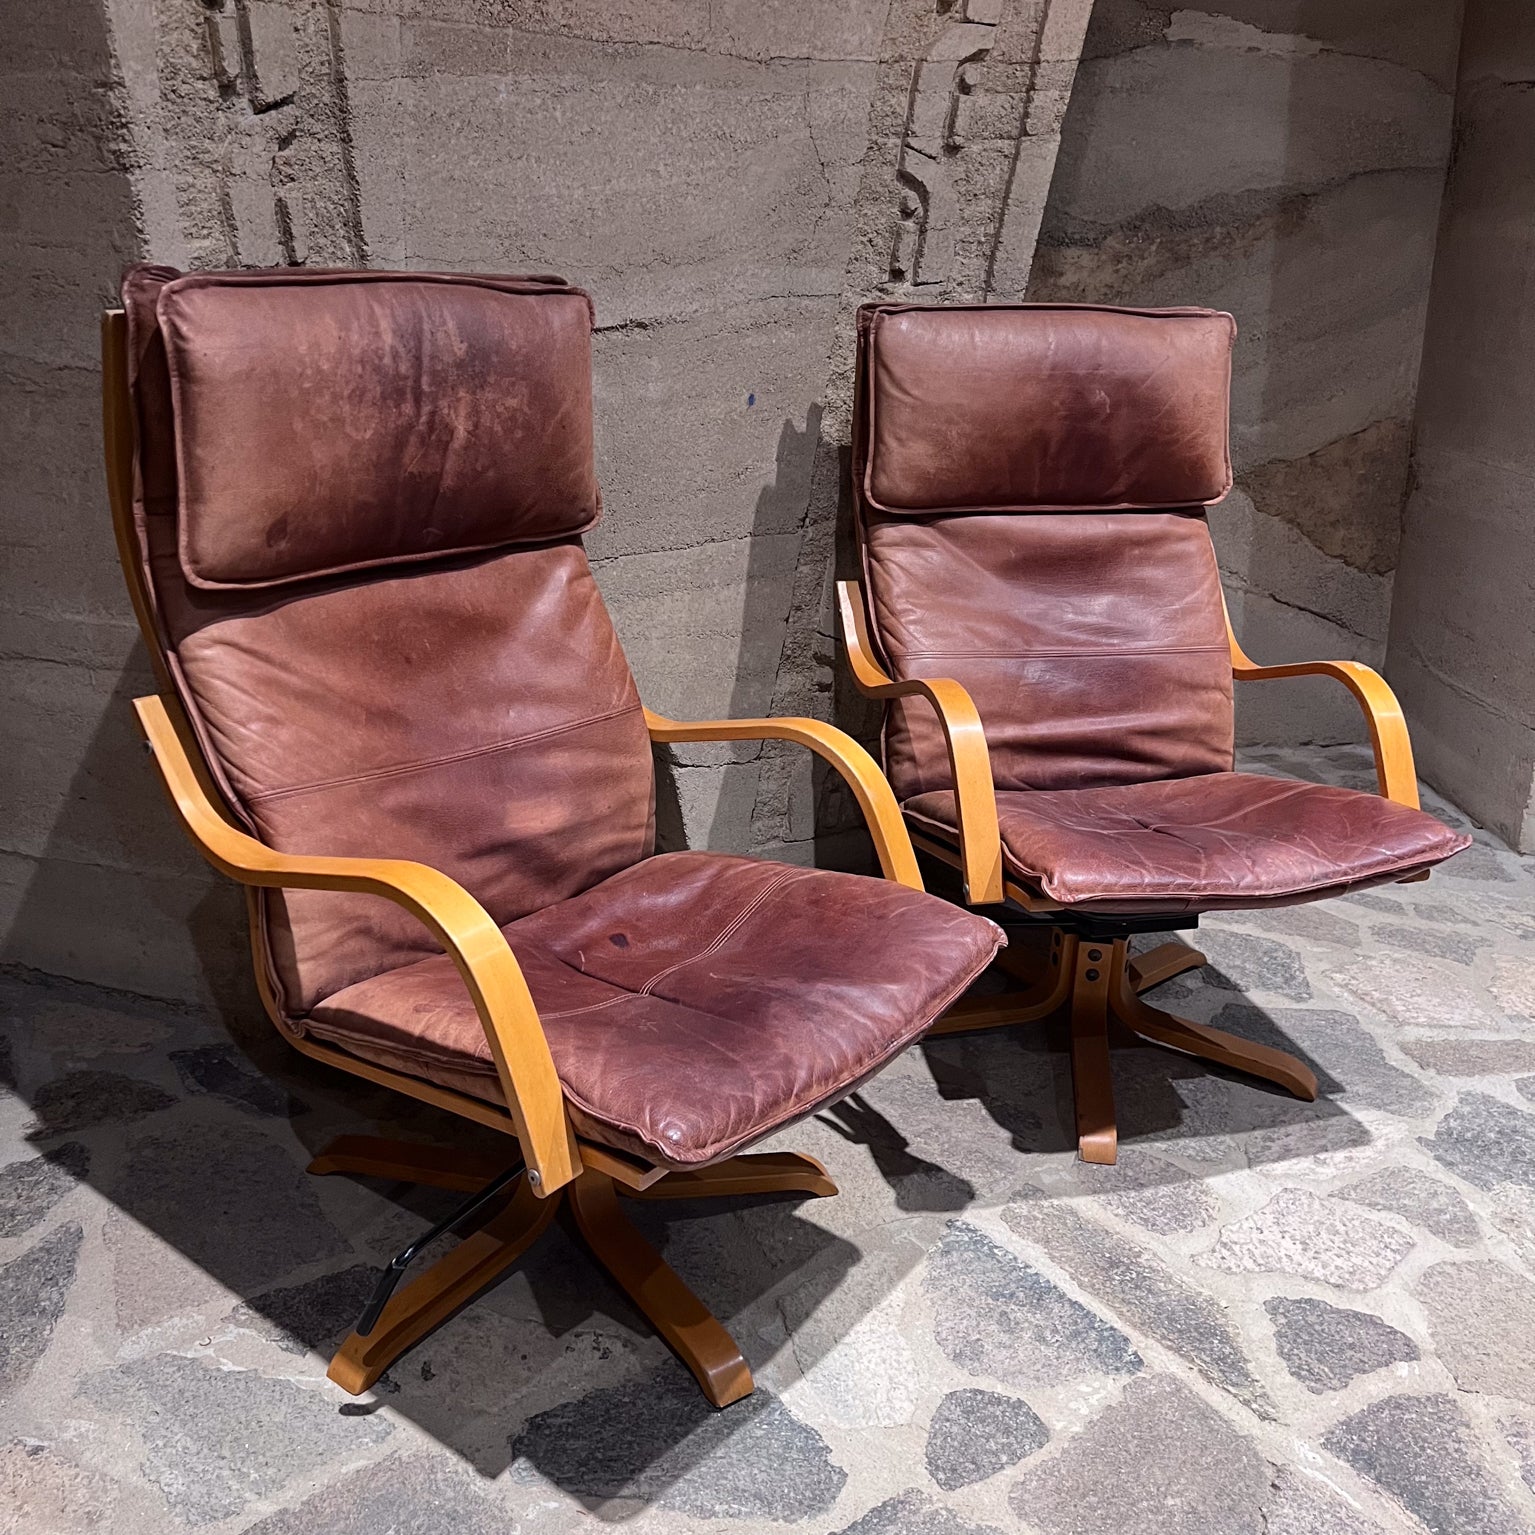 1960s Italian Swiss Leather Padded Tall Lounge Chairs
Wood Star Base
Made in Italy manner of De Sede.
Unmarked
41 tall x 31 d x 25.5 w Seat h 17 arm h 23
padded high back comfort.
Brown leather cover with fabulous aged patina.
Original unrestored